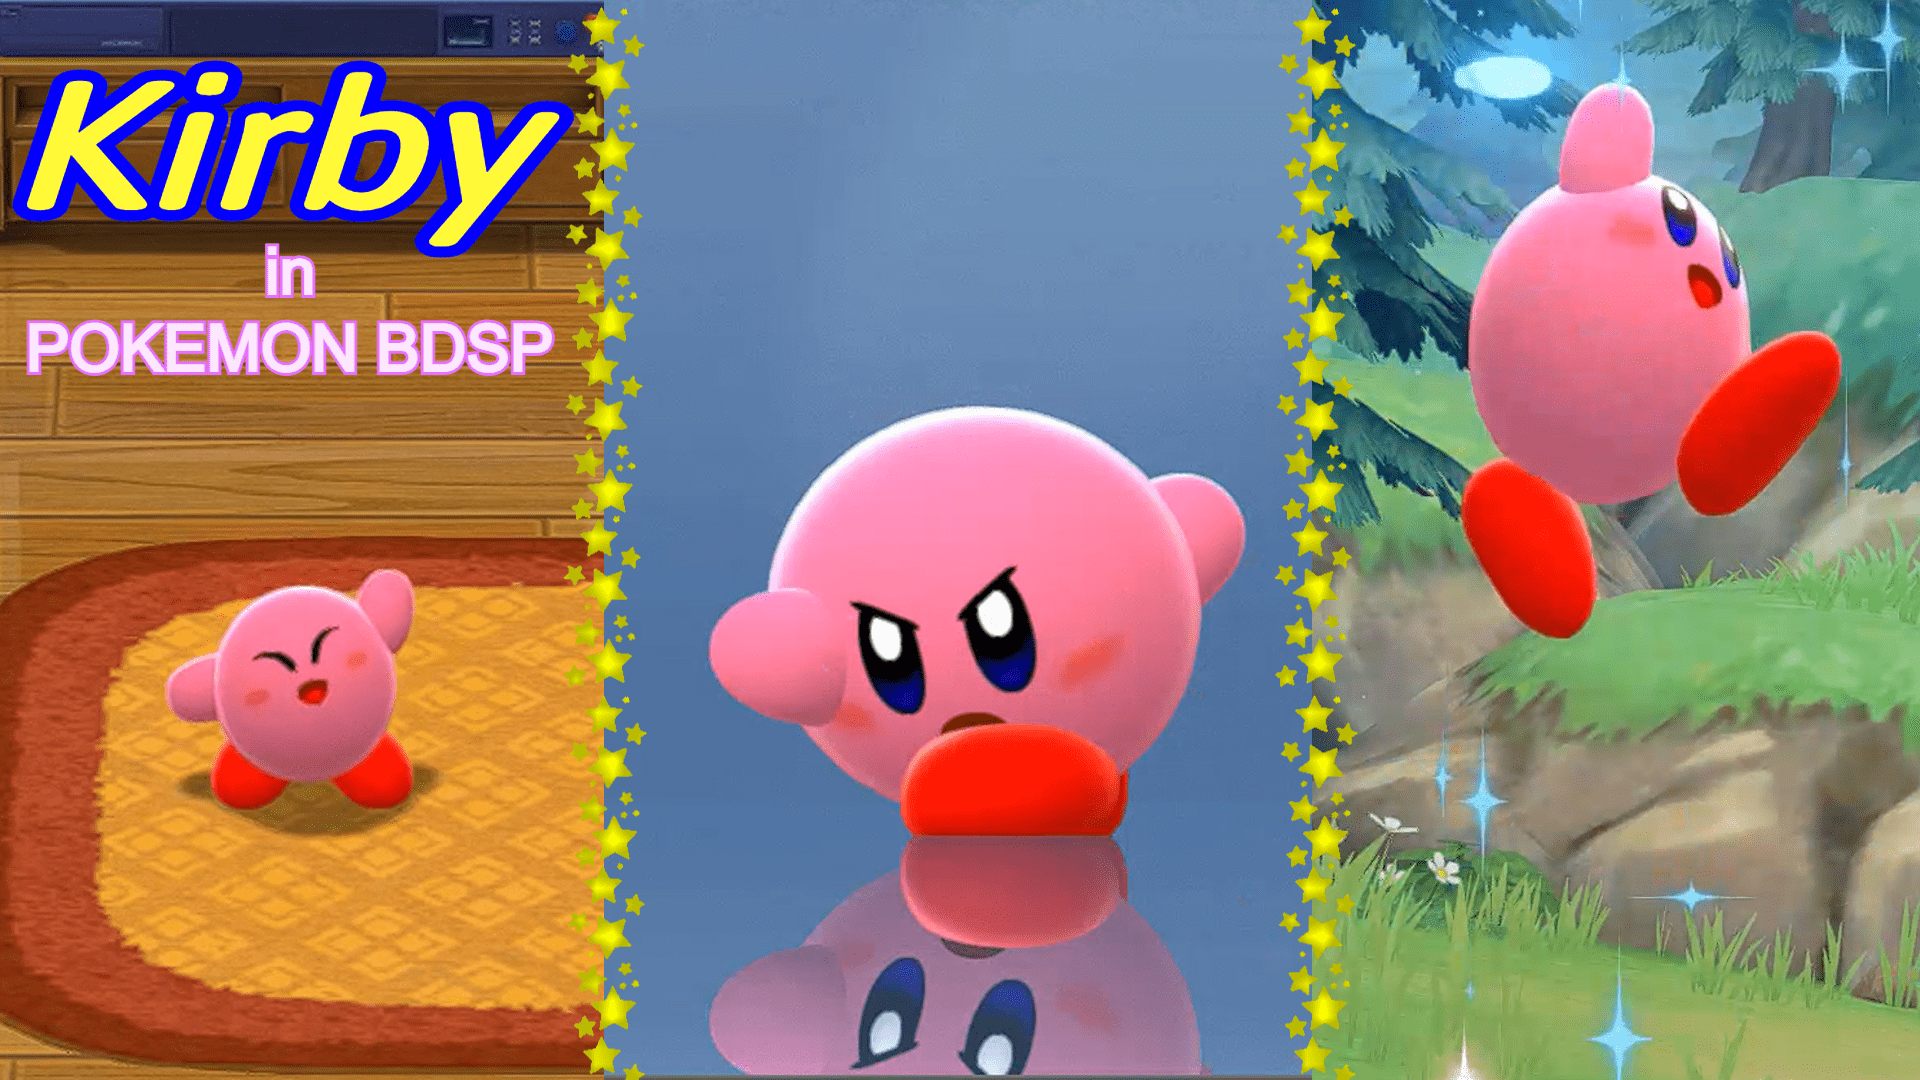 Yisuno ⚝ on X: Alright so the Kirby in Pokemon BDSP mod is almost  finished. I'm now doing some final testing to make sure nothing breaks when  doing a normal playthrough. The